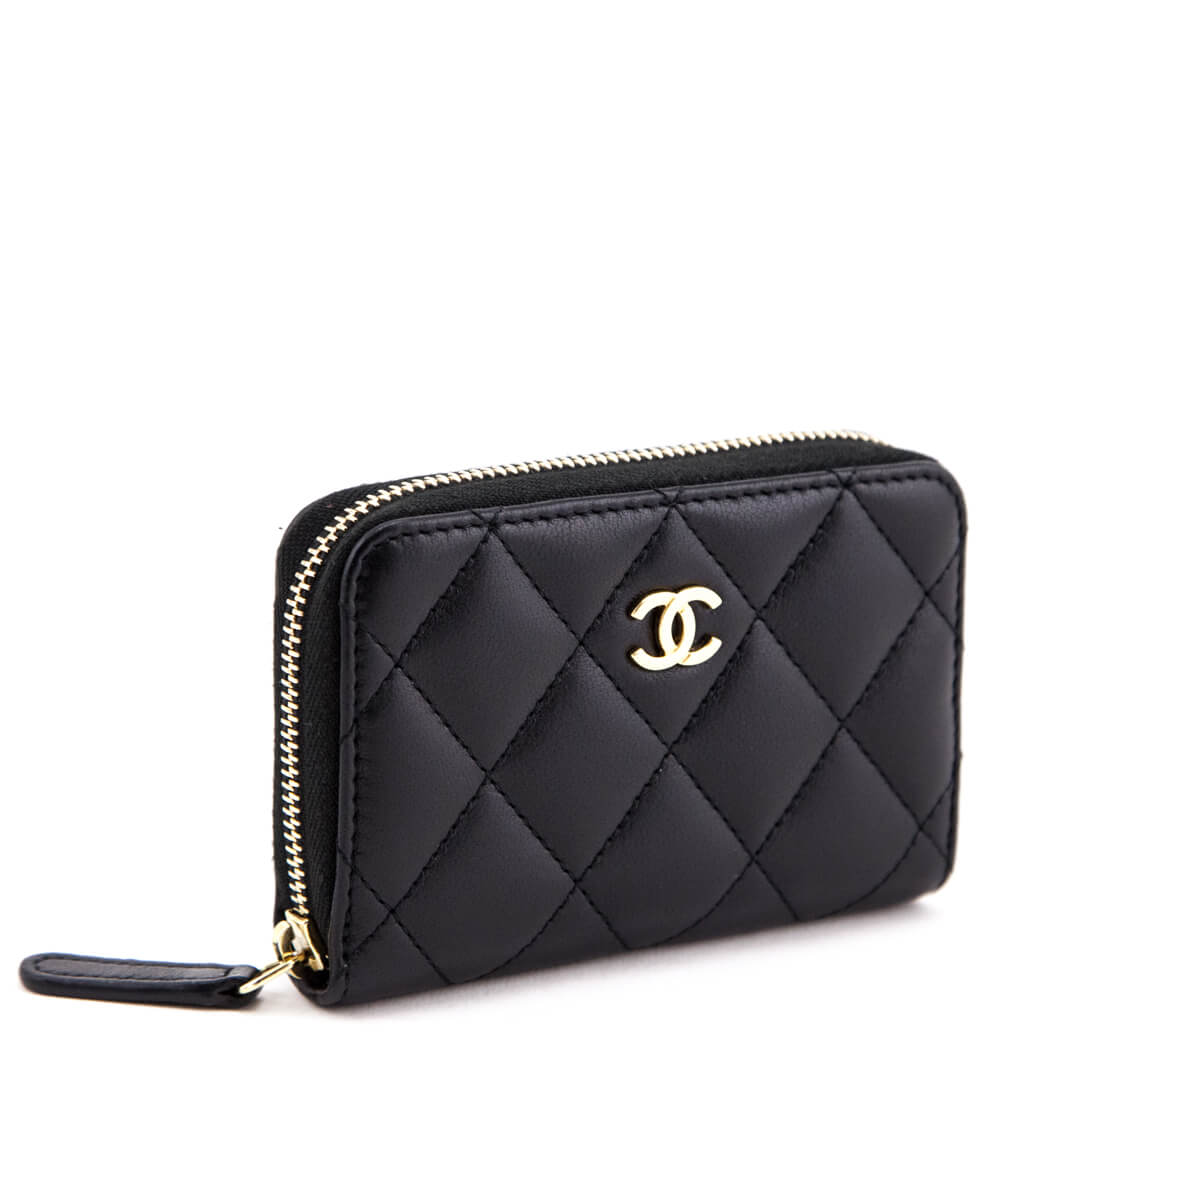 Chanel Black Quilted Lambskin Classic Zipped Coin Purse - Shop Chanel